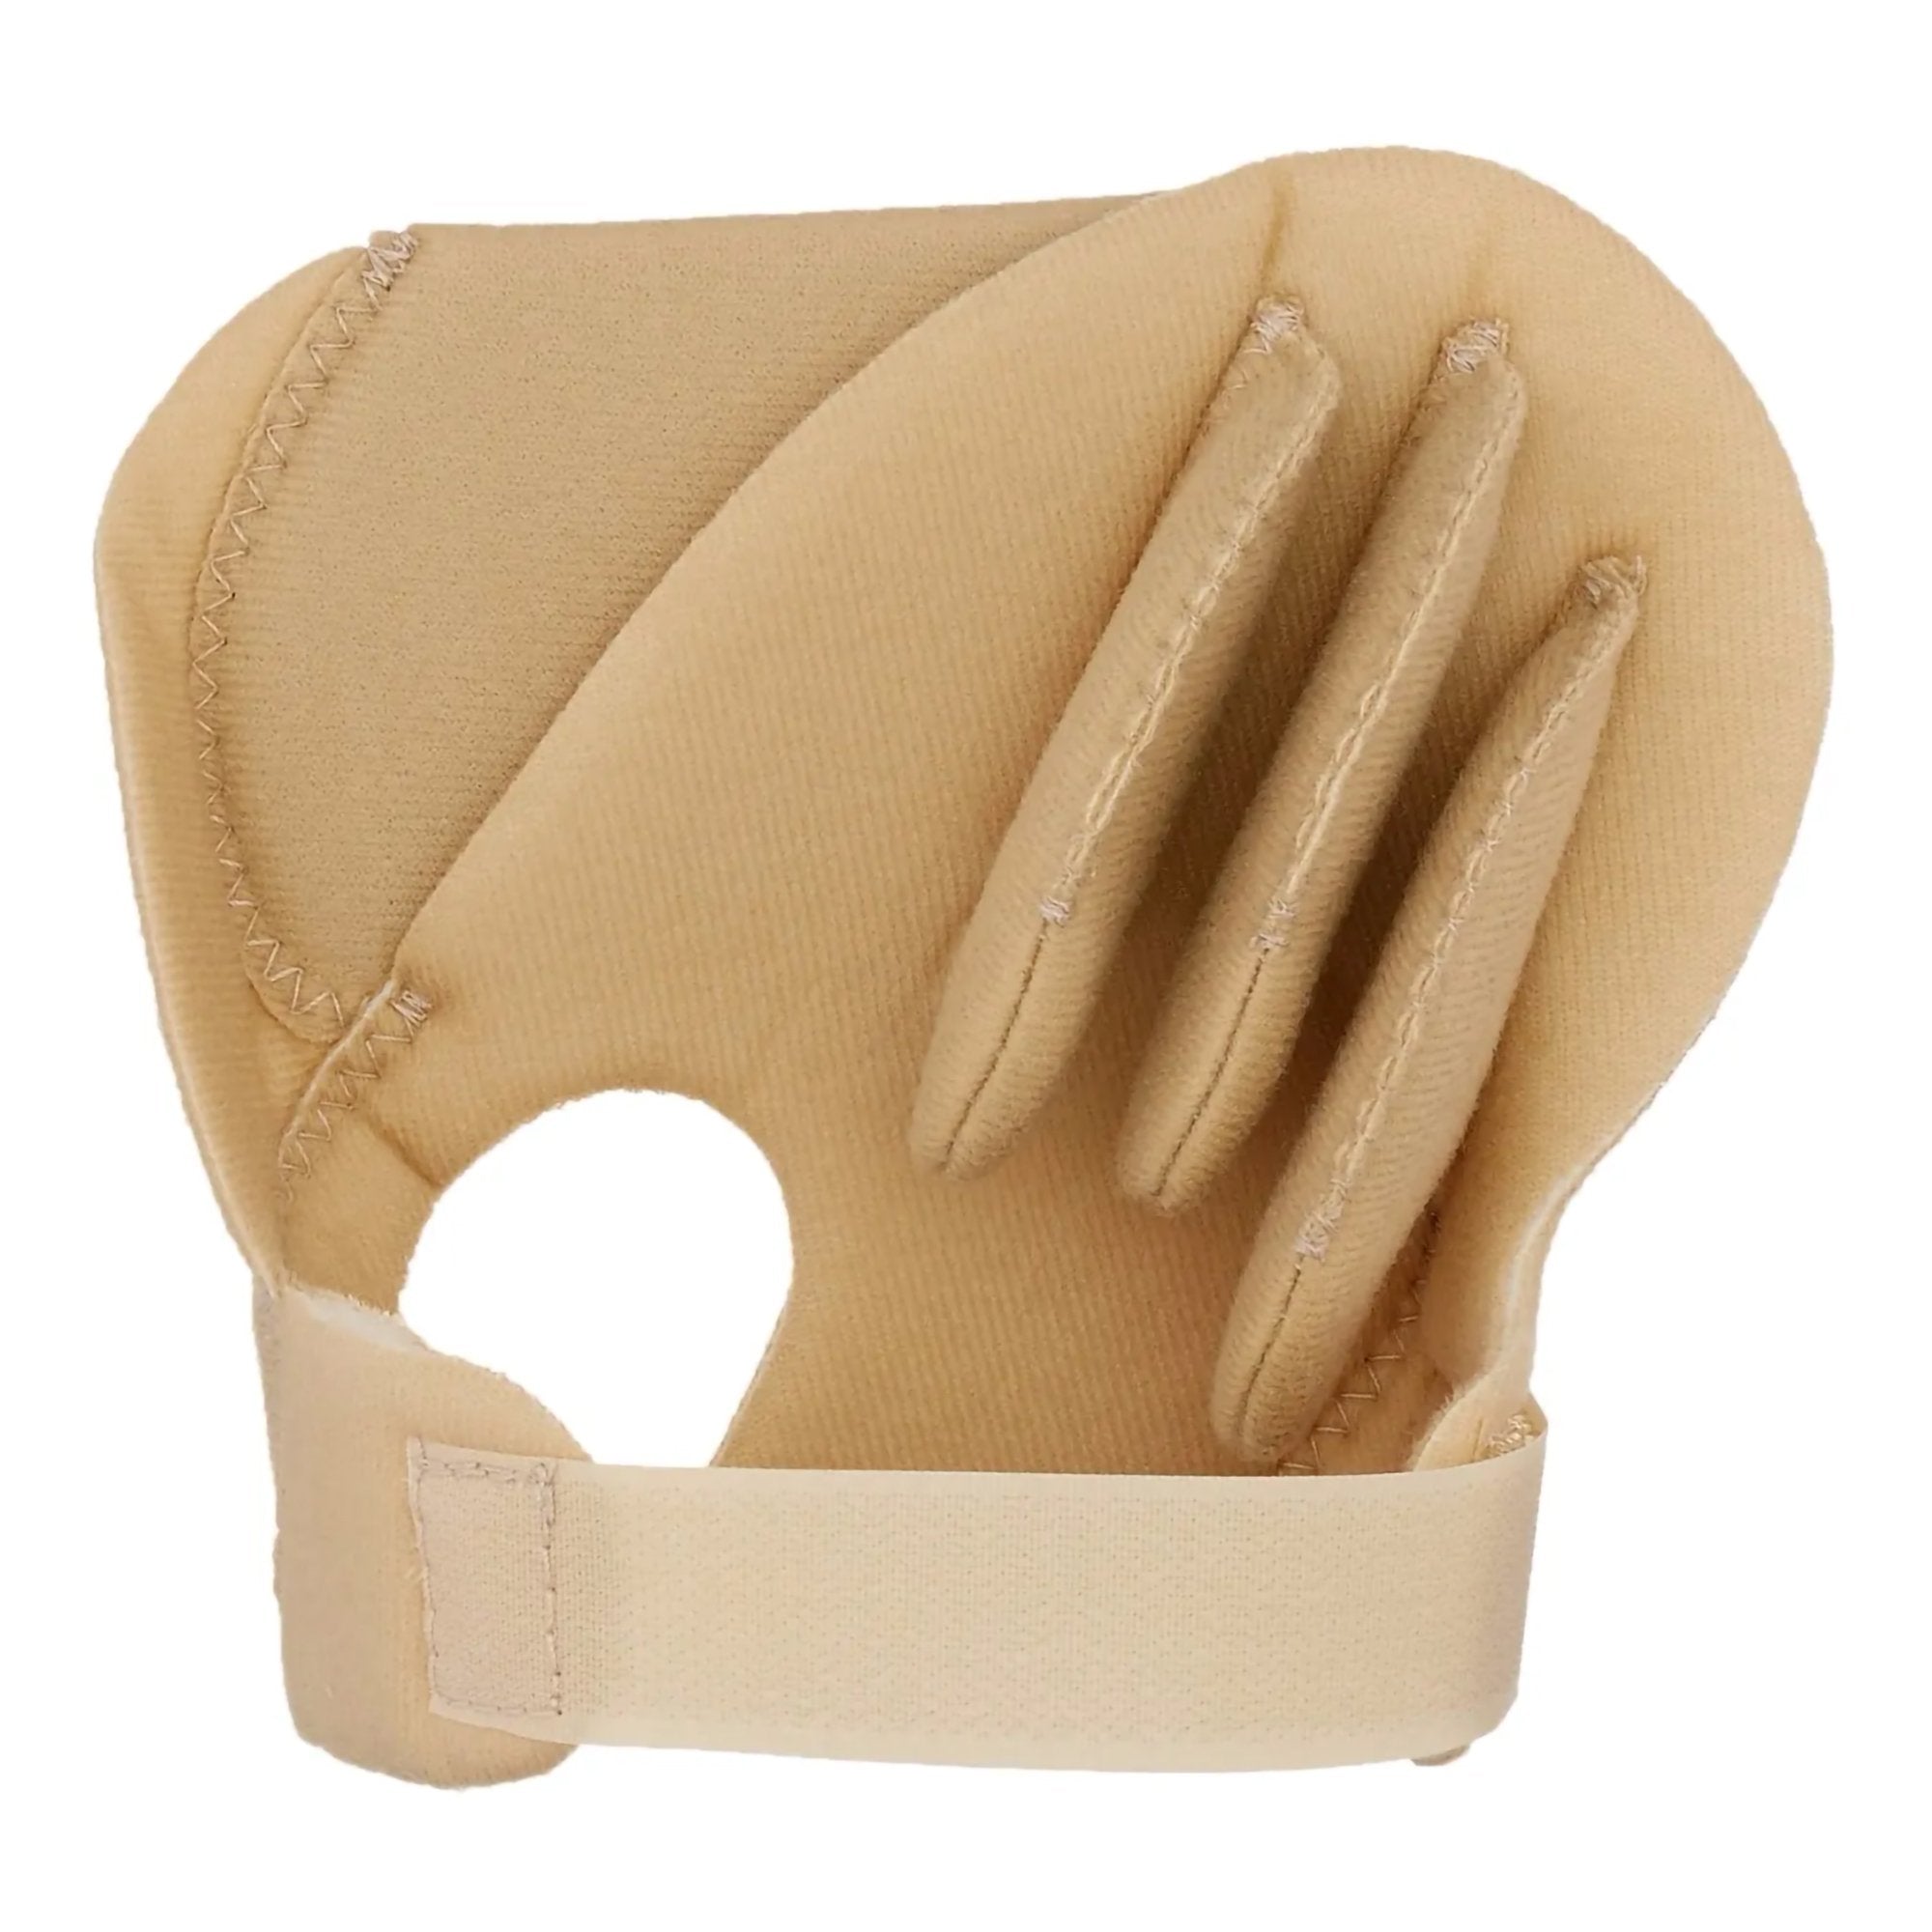 Palm Protector Rolyan® Sof-Foam Foam Right Hand Beige One Size Fits Most